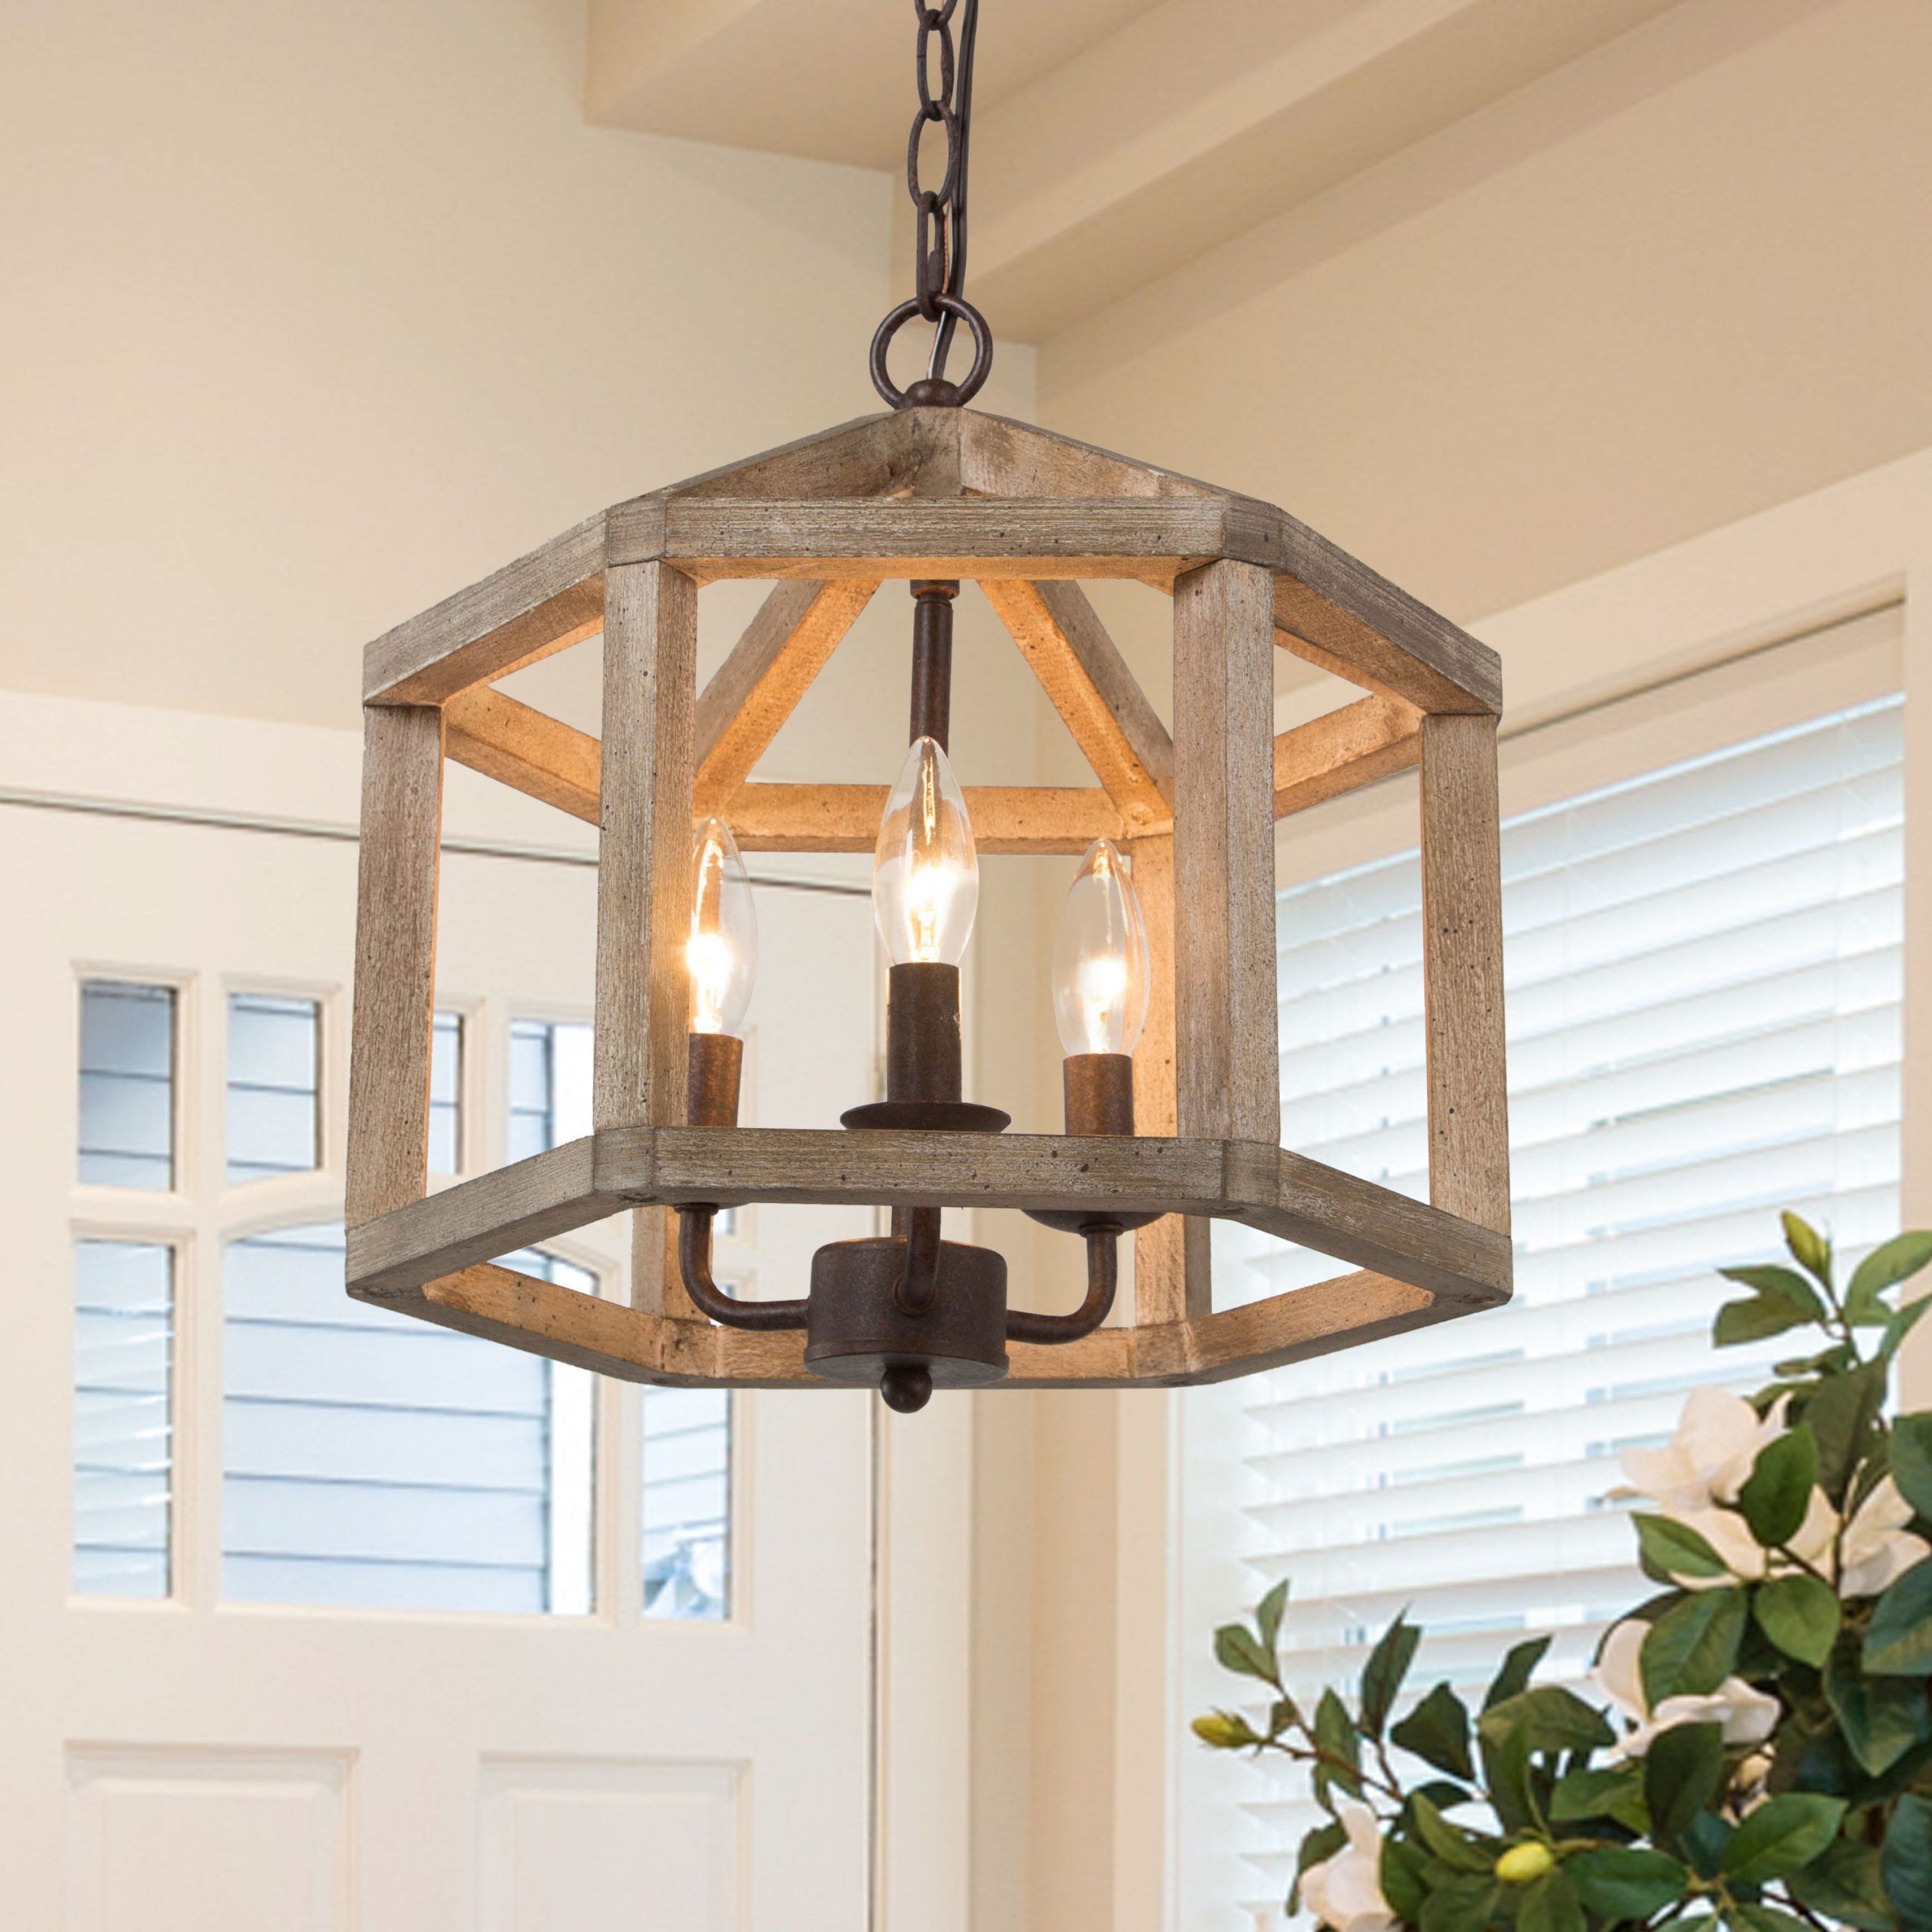 Widely Used Weathered Oak Wood Lantern Chandeliers Regarding Lnc Quaint 3 Light Distressed Wood Brown And Rustic Bronze Drum Farmhouse  Cage Led Chandelier In The Chandeliers Department At Lowes (View 14 of 15)